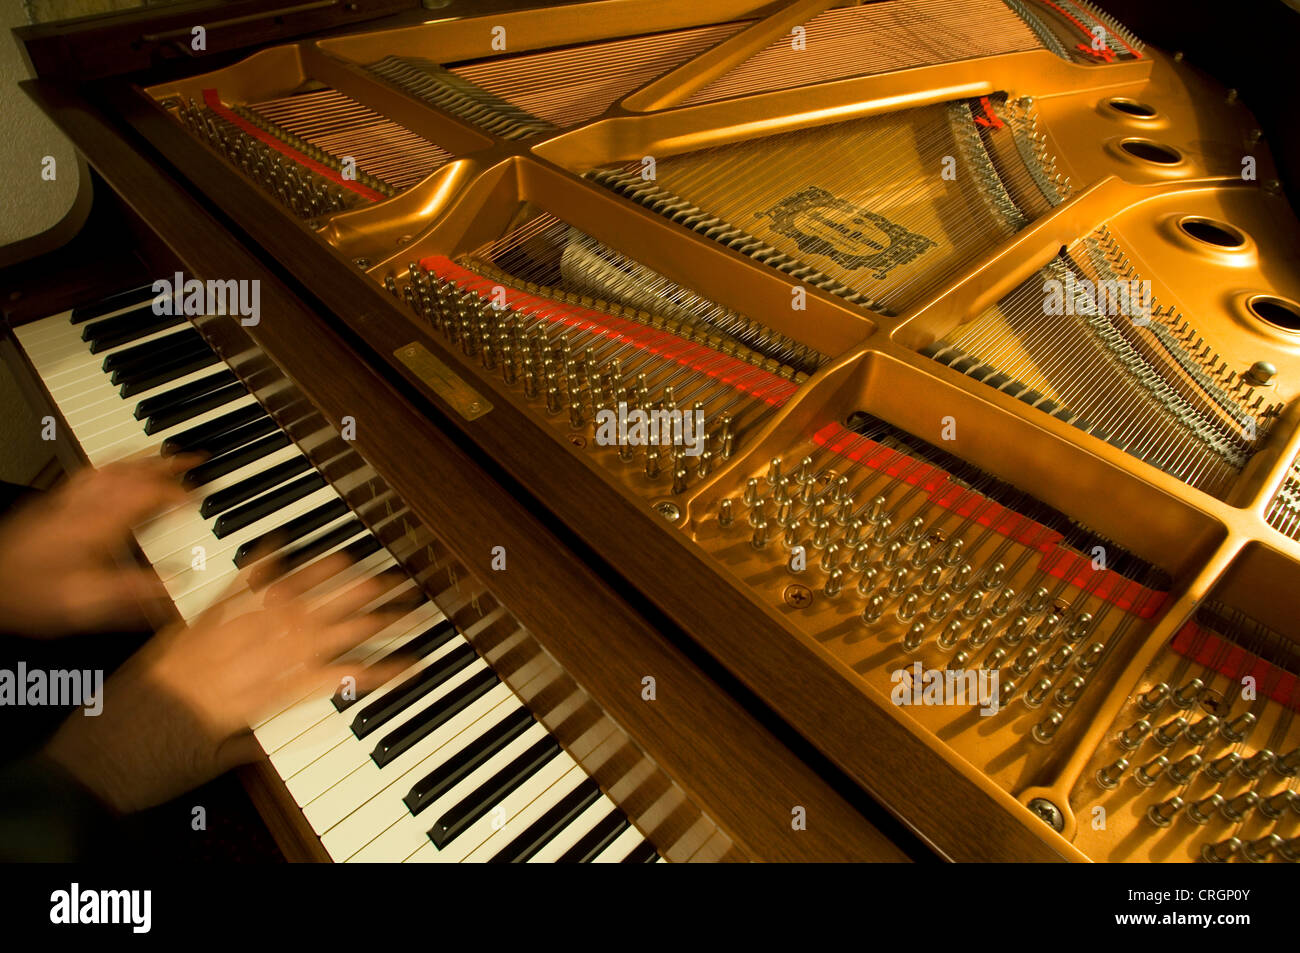 keys, strings and mechanism of grand piano Stock Photo